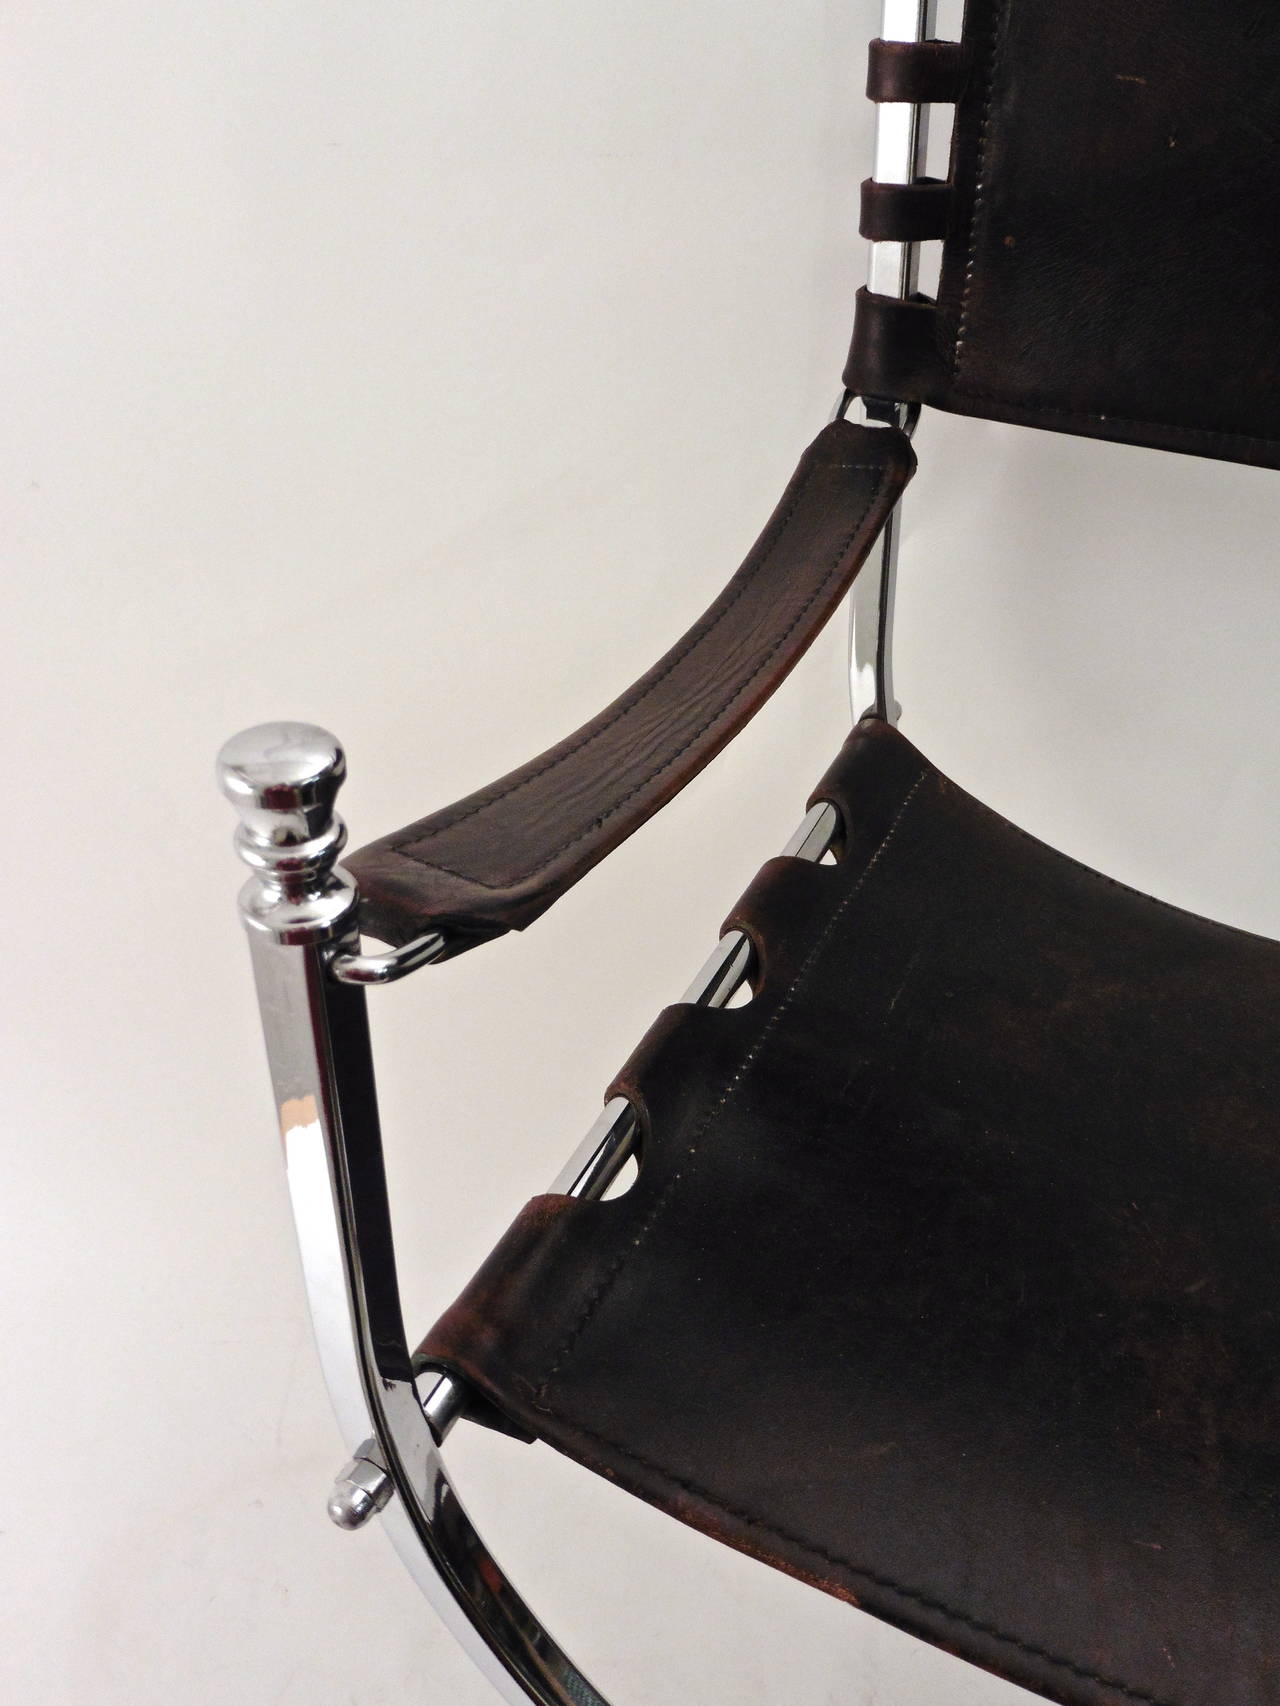 Sensational set of four Curule shaped chrome armchairs. With wonderful thick saddle leather seats, backs and armrests. Manufactured by Maison Jansen, France, circa 1970.